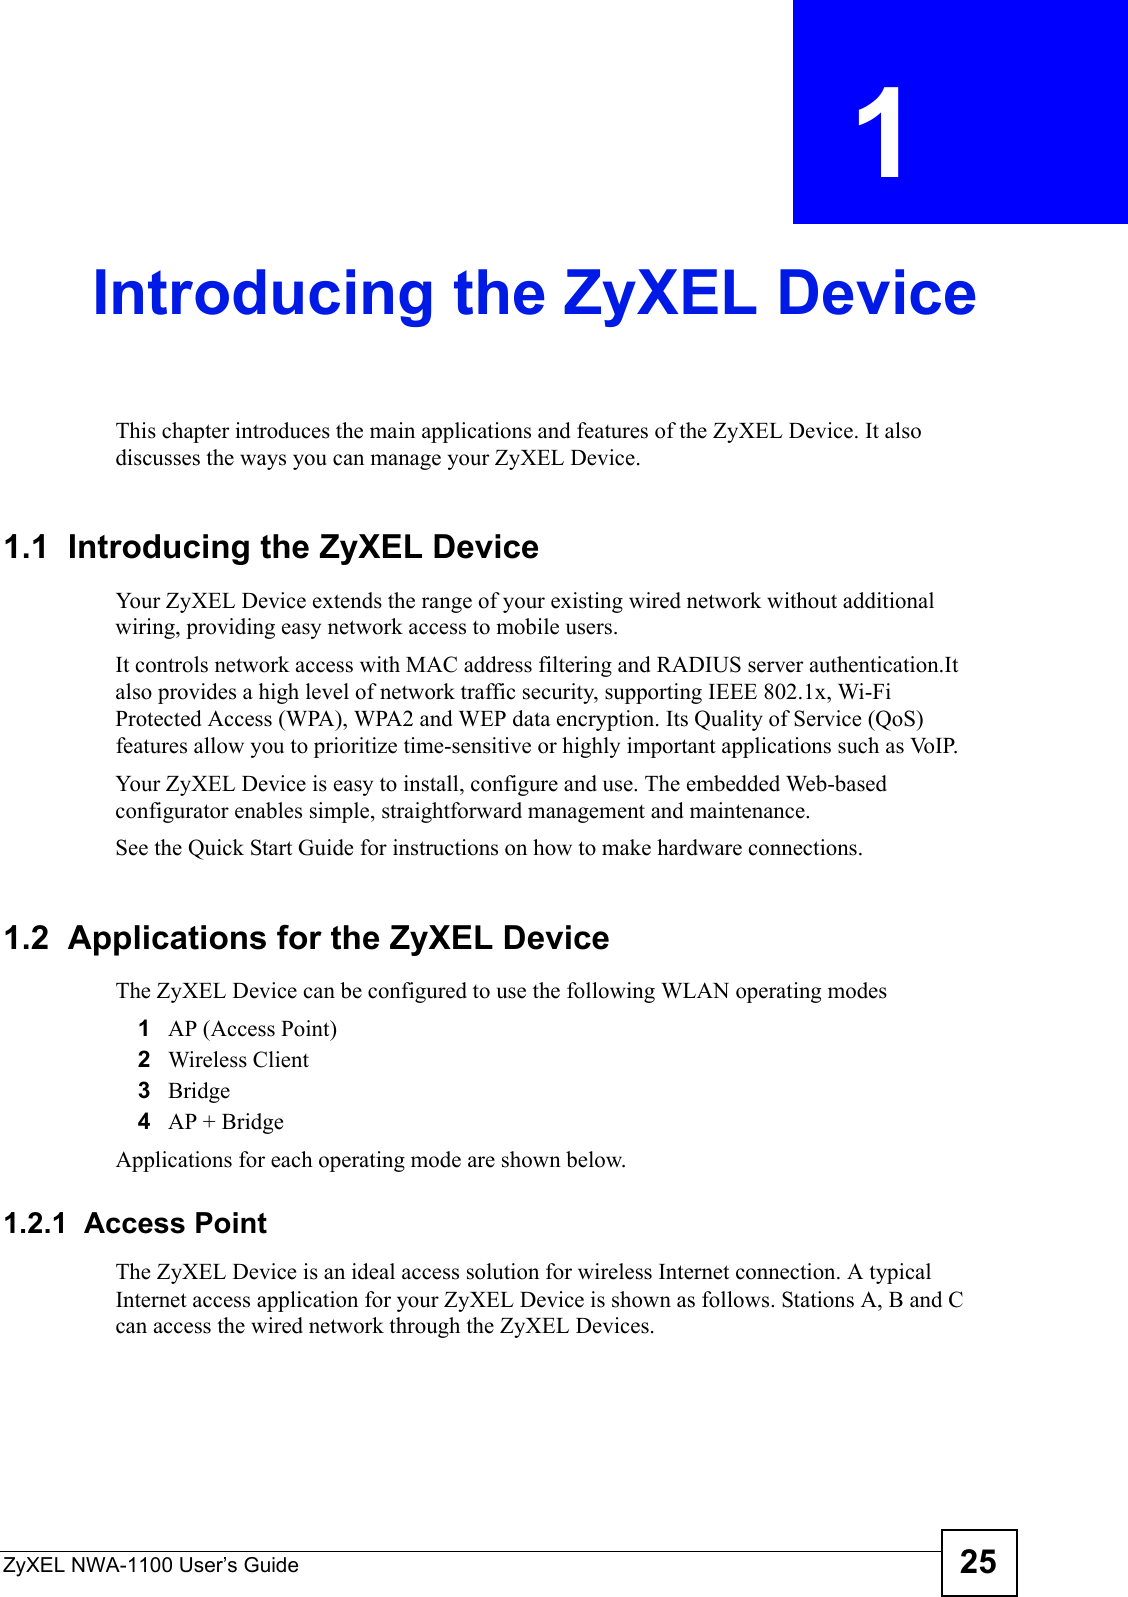 ZyXEL NWA-1100 User’s Guide 25CHAPTER  1 Introducing the ZyXEL DeviceThis chapter introduces the main applications and features of the ZyXEL Device. It also discusses the ways you can manage your ZyXEL Device.1.1  Introducing the ZyXEL Device Your ZyXEL Device extends the range of your existing wired network without additional wiring, providing easy network access to mobile users. It controls network access with MAC address filtering and RADIUS server authentication.It also provides a high level of network traffic security, supporting IEEE 802.1x, Wi-Fi Protected Access (WPA), WPA2 and WEP data encryption. Its Quality of Service (QoS) features allow you to prioritize time-sensitive or highly important applications such as VoIP.Your ZyXEL Device is easy to install, configure and use. The embedded Web-based configurator enables simple, straightforward management and maintenance.See the Quick Start Guide for instructions on how to make hardware connections.1.2  Applications for the ZyXEL DeviceThe ZyXEL Device can be configured to use the following WLAN operating modes1AP (Access Point)2Wireless Client3Bridge4AP + BridgeApplications for each operating mode are shown below.1.2.1  Access Point The ZyXEL Device is an ideal access solution for wireless Internet connection. A typical Internet access application for your ZyXEL Device is shown as follows. Stations A, B and C can access the wired network through the ZyXEL Devices.